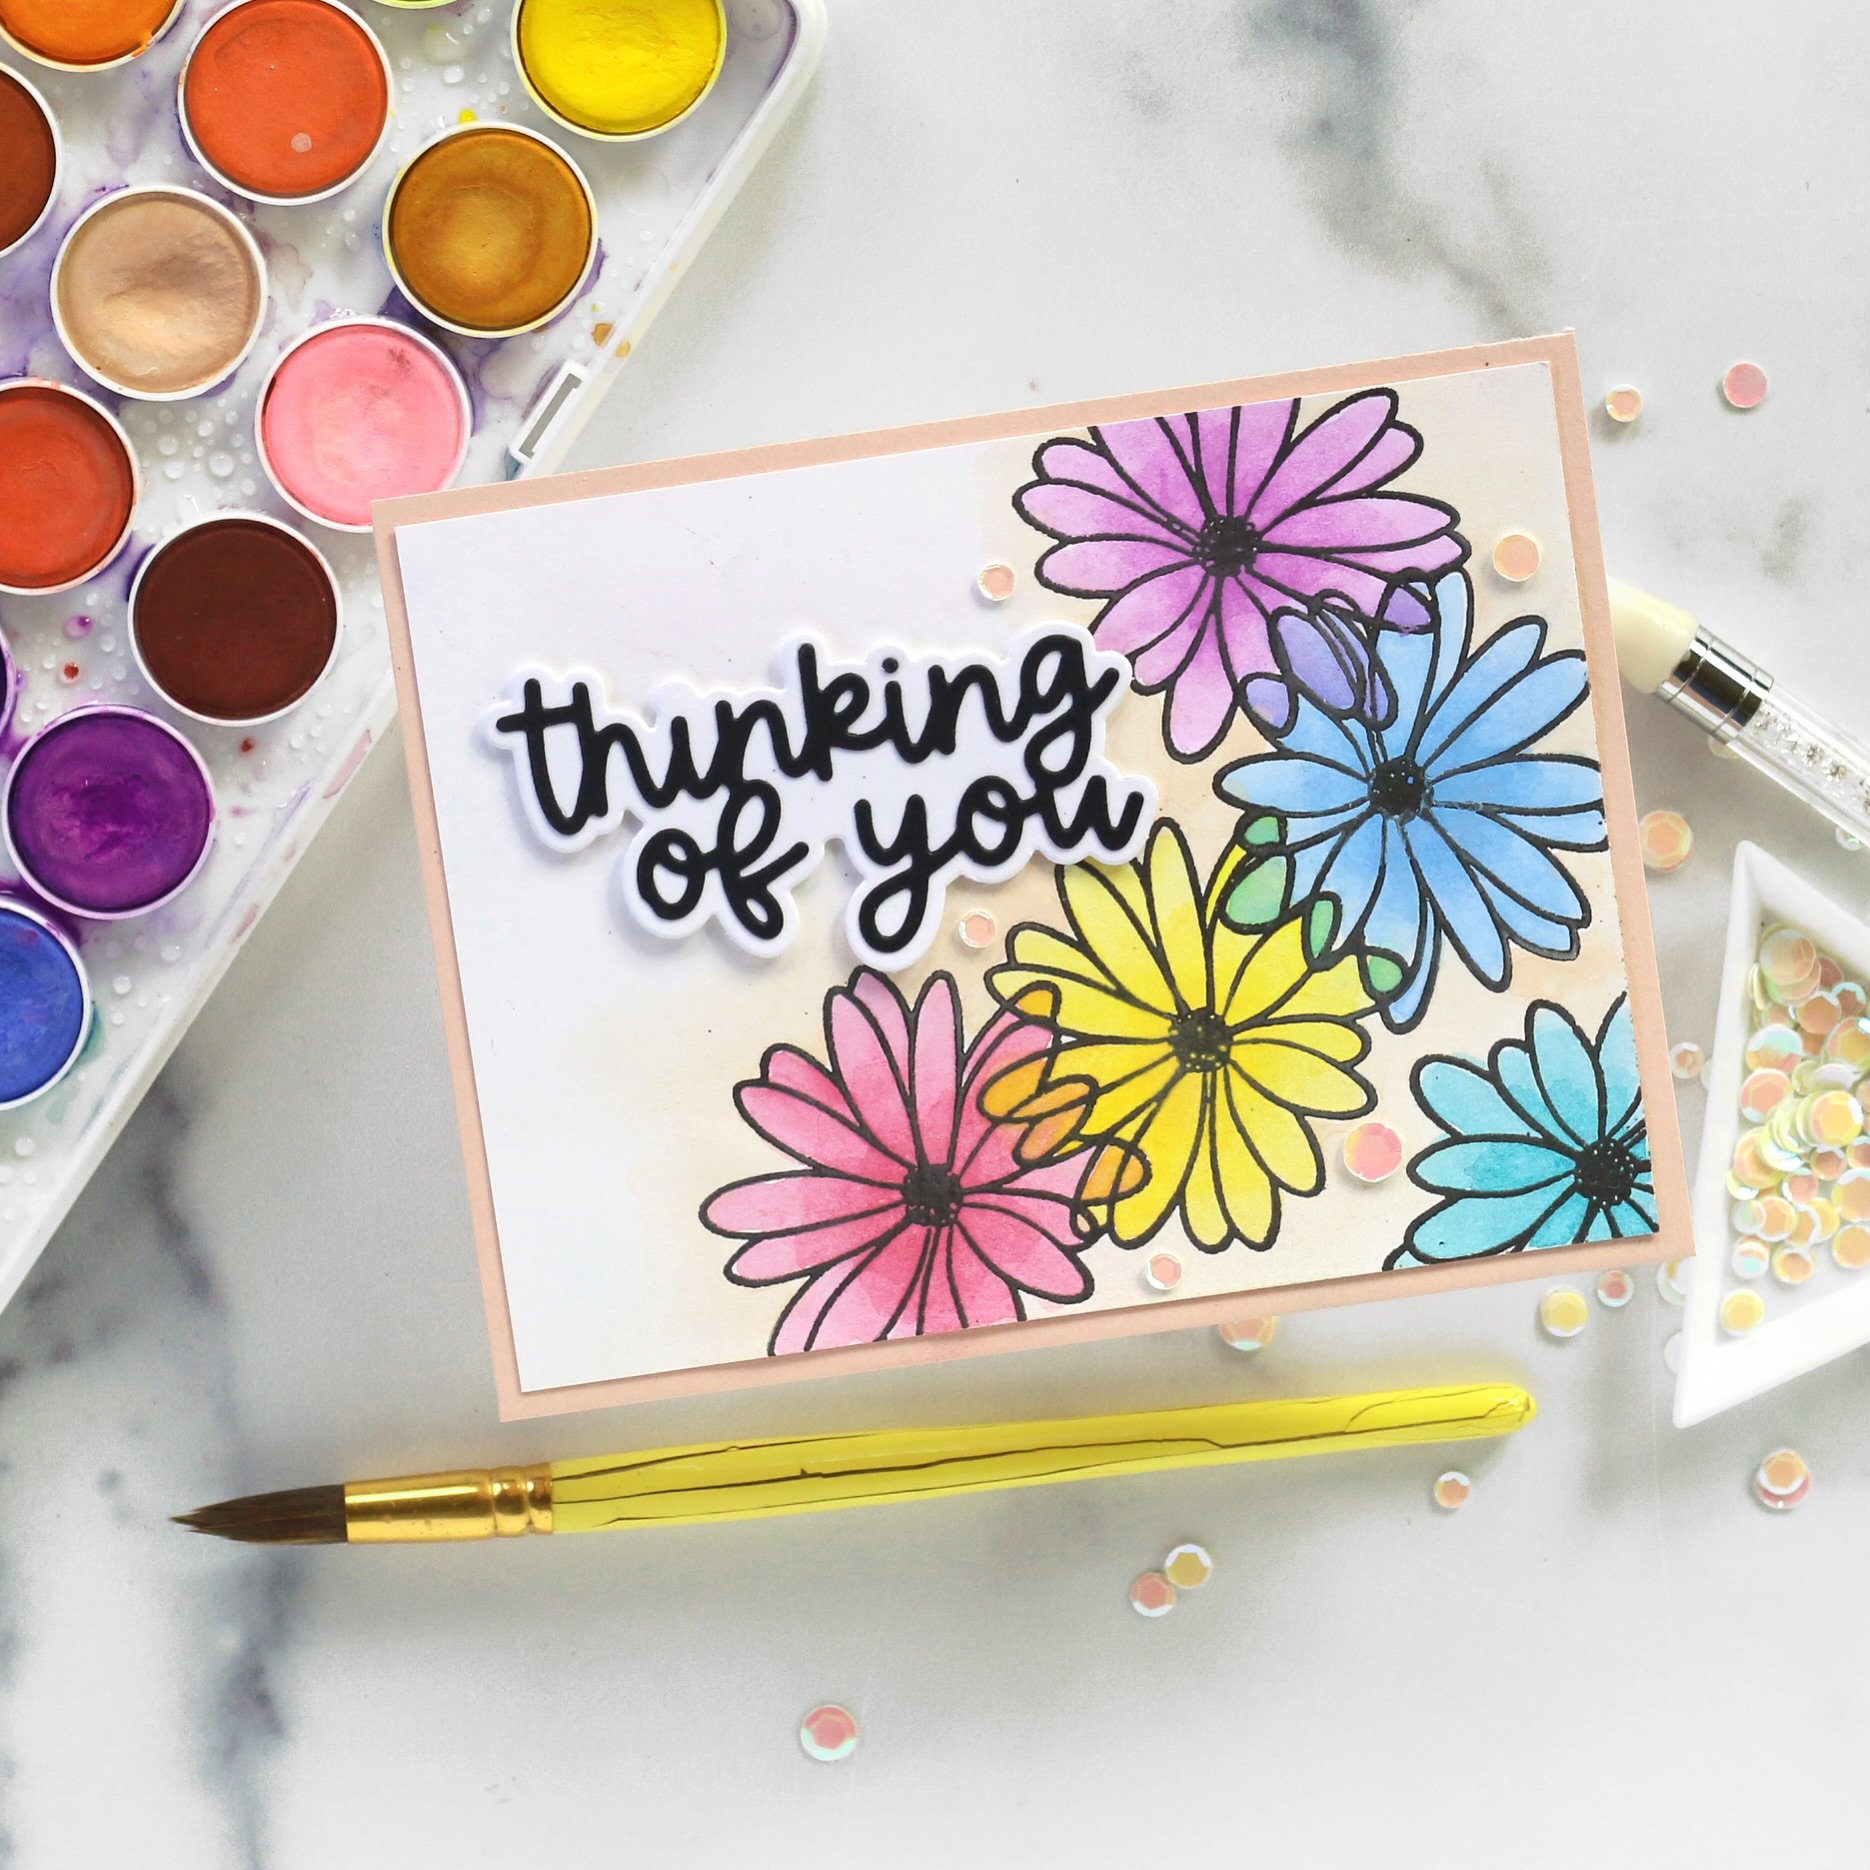 Let&rsquo;s get artsy tomorrow, Friday, May 10th at 12:30 pm Eastern during my YouTubr Live!
.
I&rsquo;m using a new stamp from @ginakdesigns and @lisahetrickindigojadeart to share a fun watercoloring technique that anyone can do with any watercolors